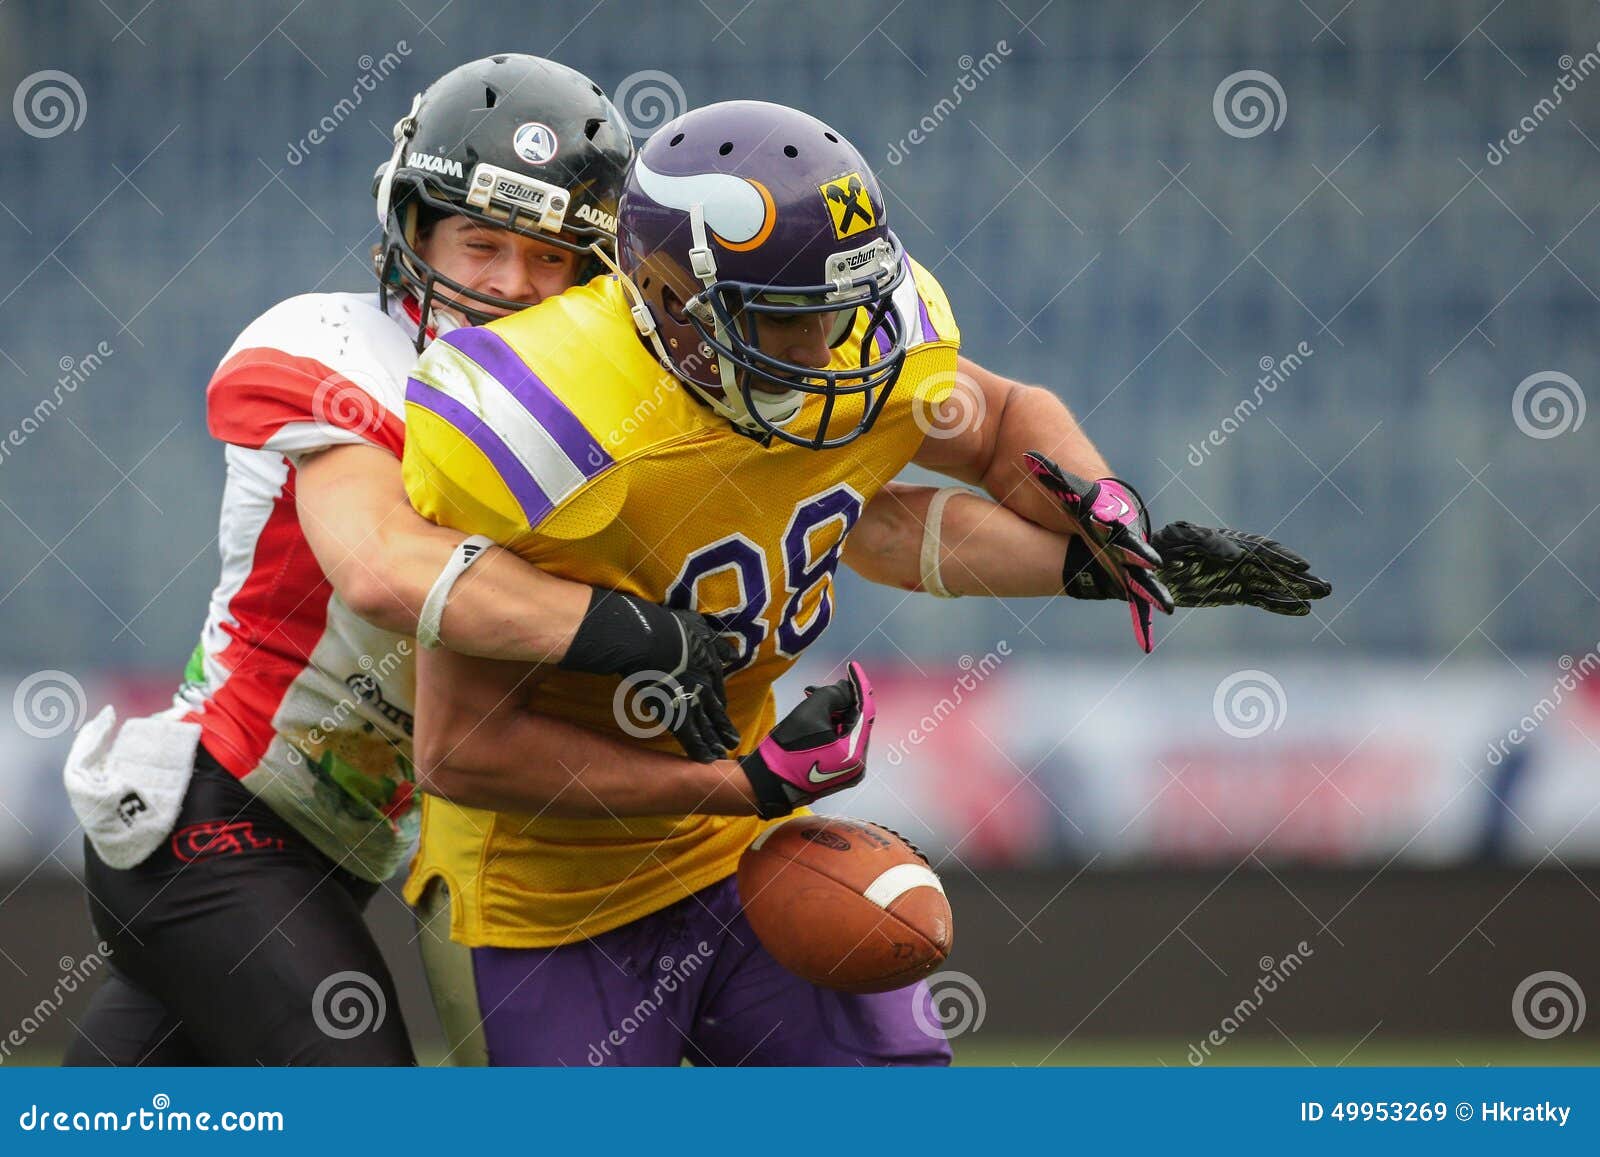 ST. POELTEN, AUSTRIA - JULY 26, 2014: DB Nikolaus Rabitsch (#17 Lions) strips the ball from WR Sam Hassanein (#88 Vikings) during Silver Bowl XVII.